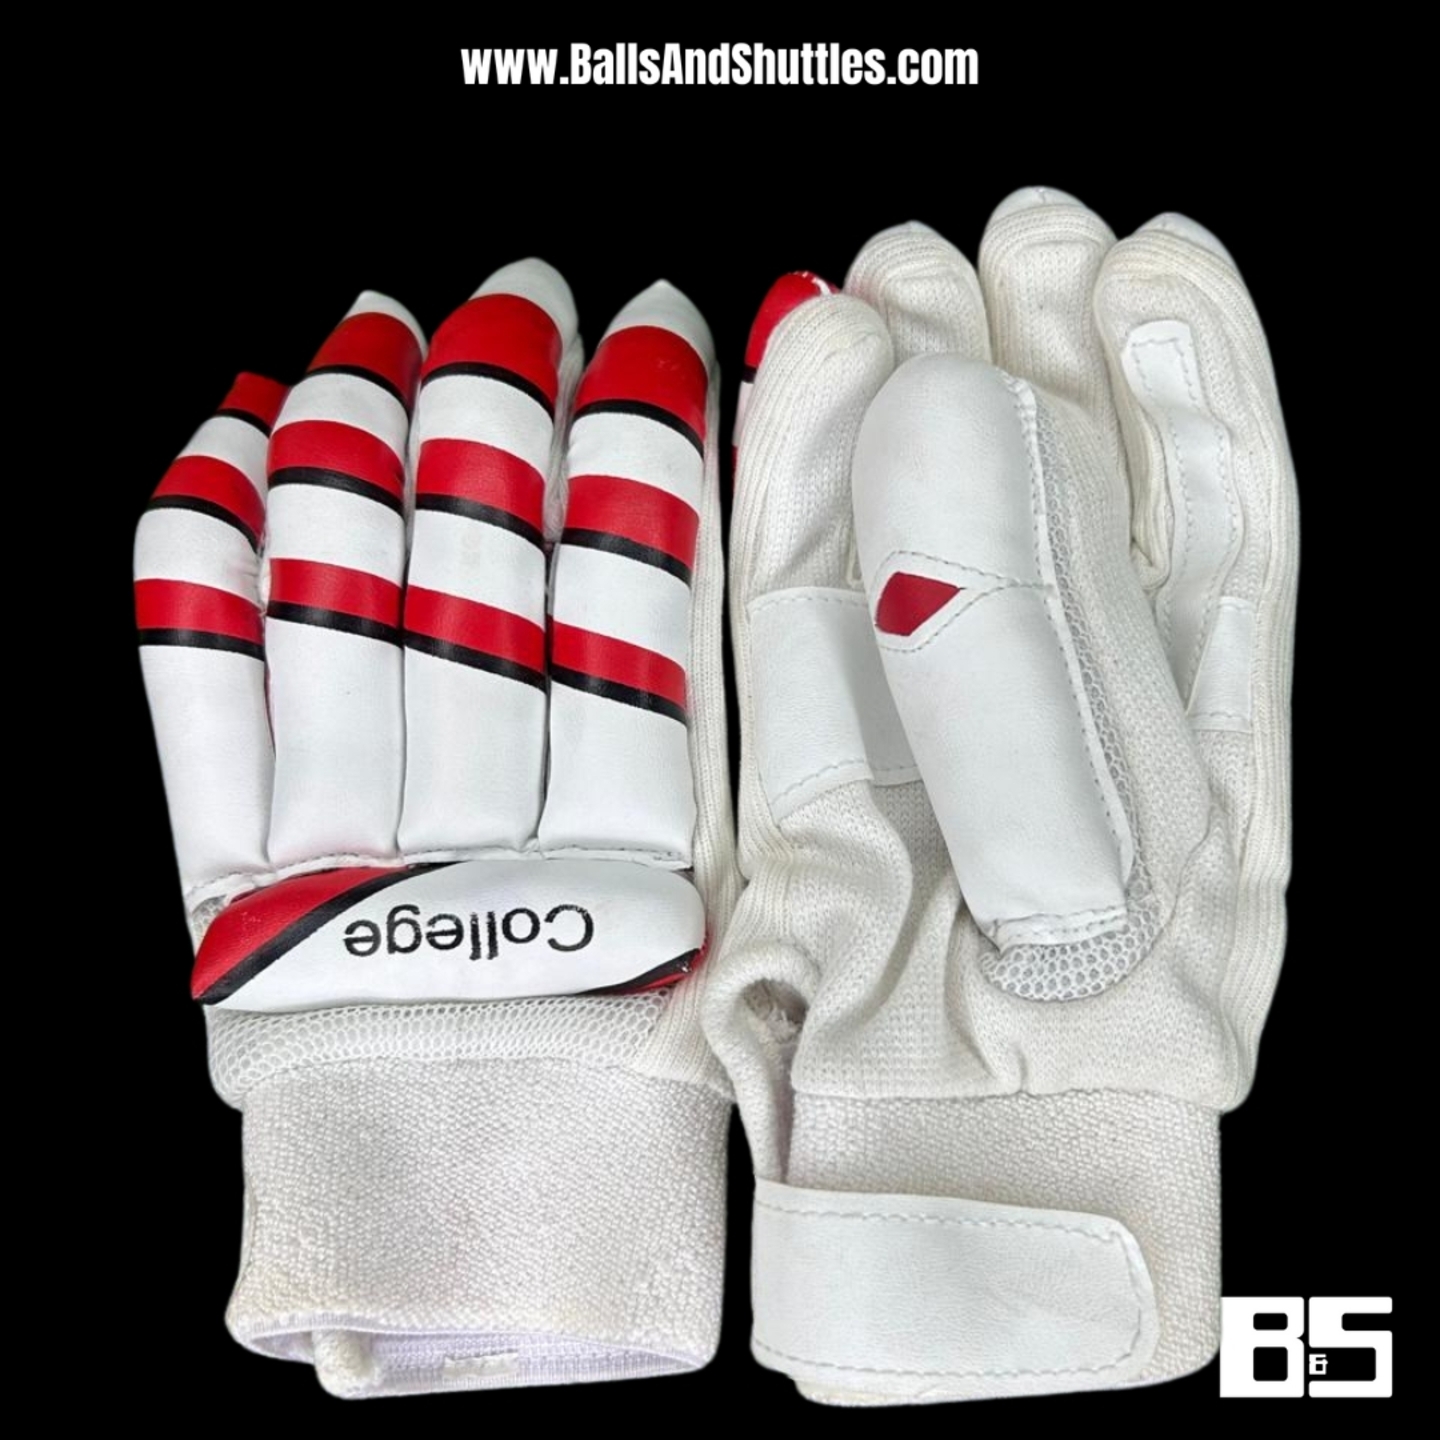 SF COLLEGE CRICKET BATTING GLOVES  YOUTH SIZE BATTING GLOVES  RH BATTING GLOVES